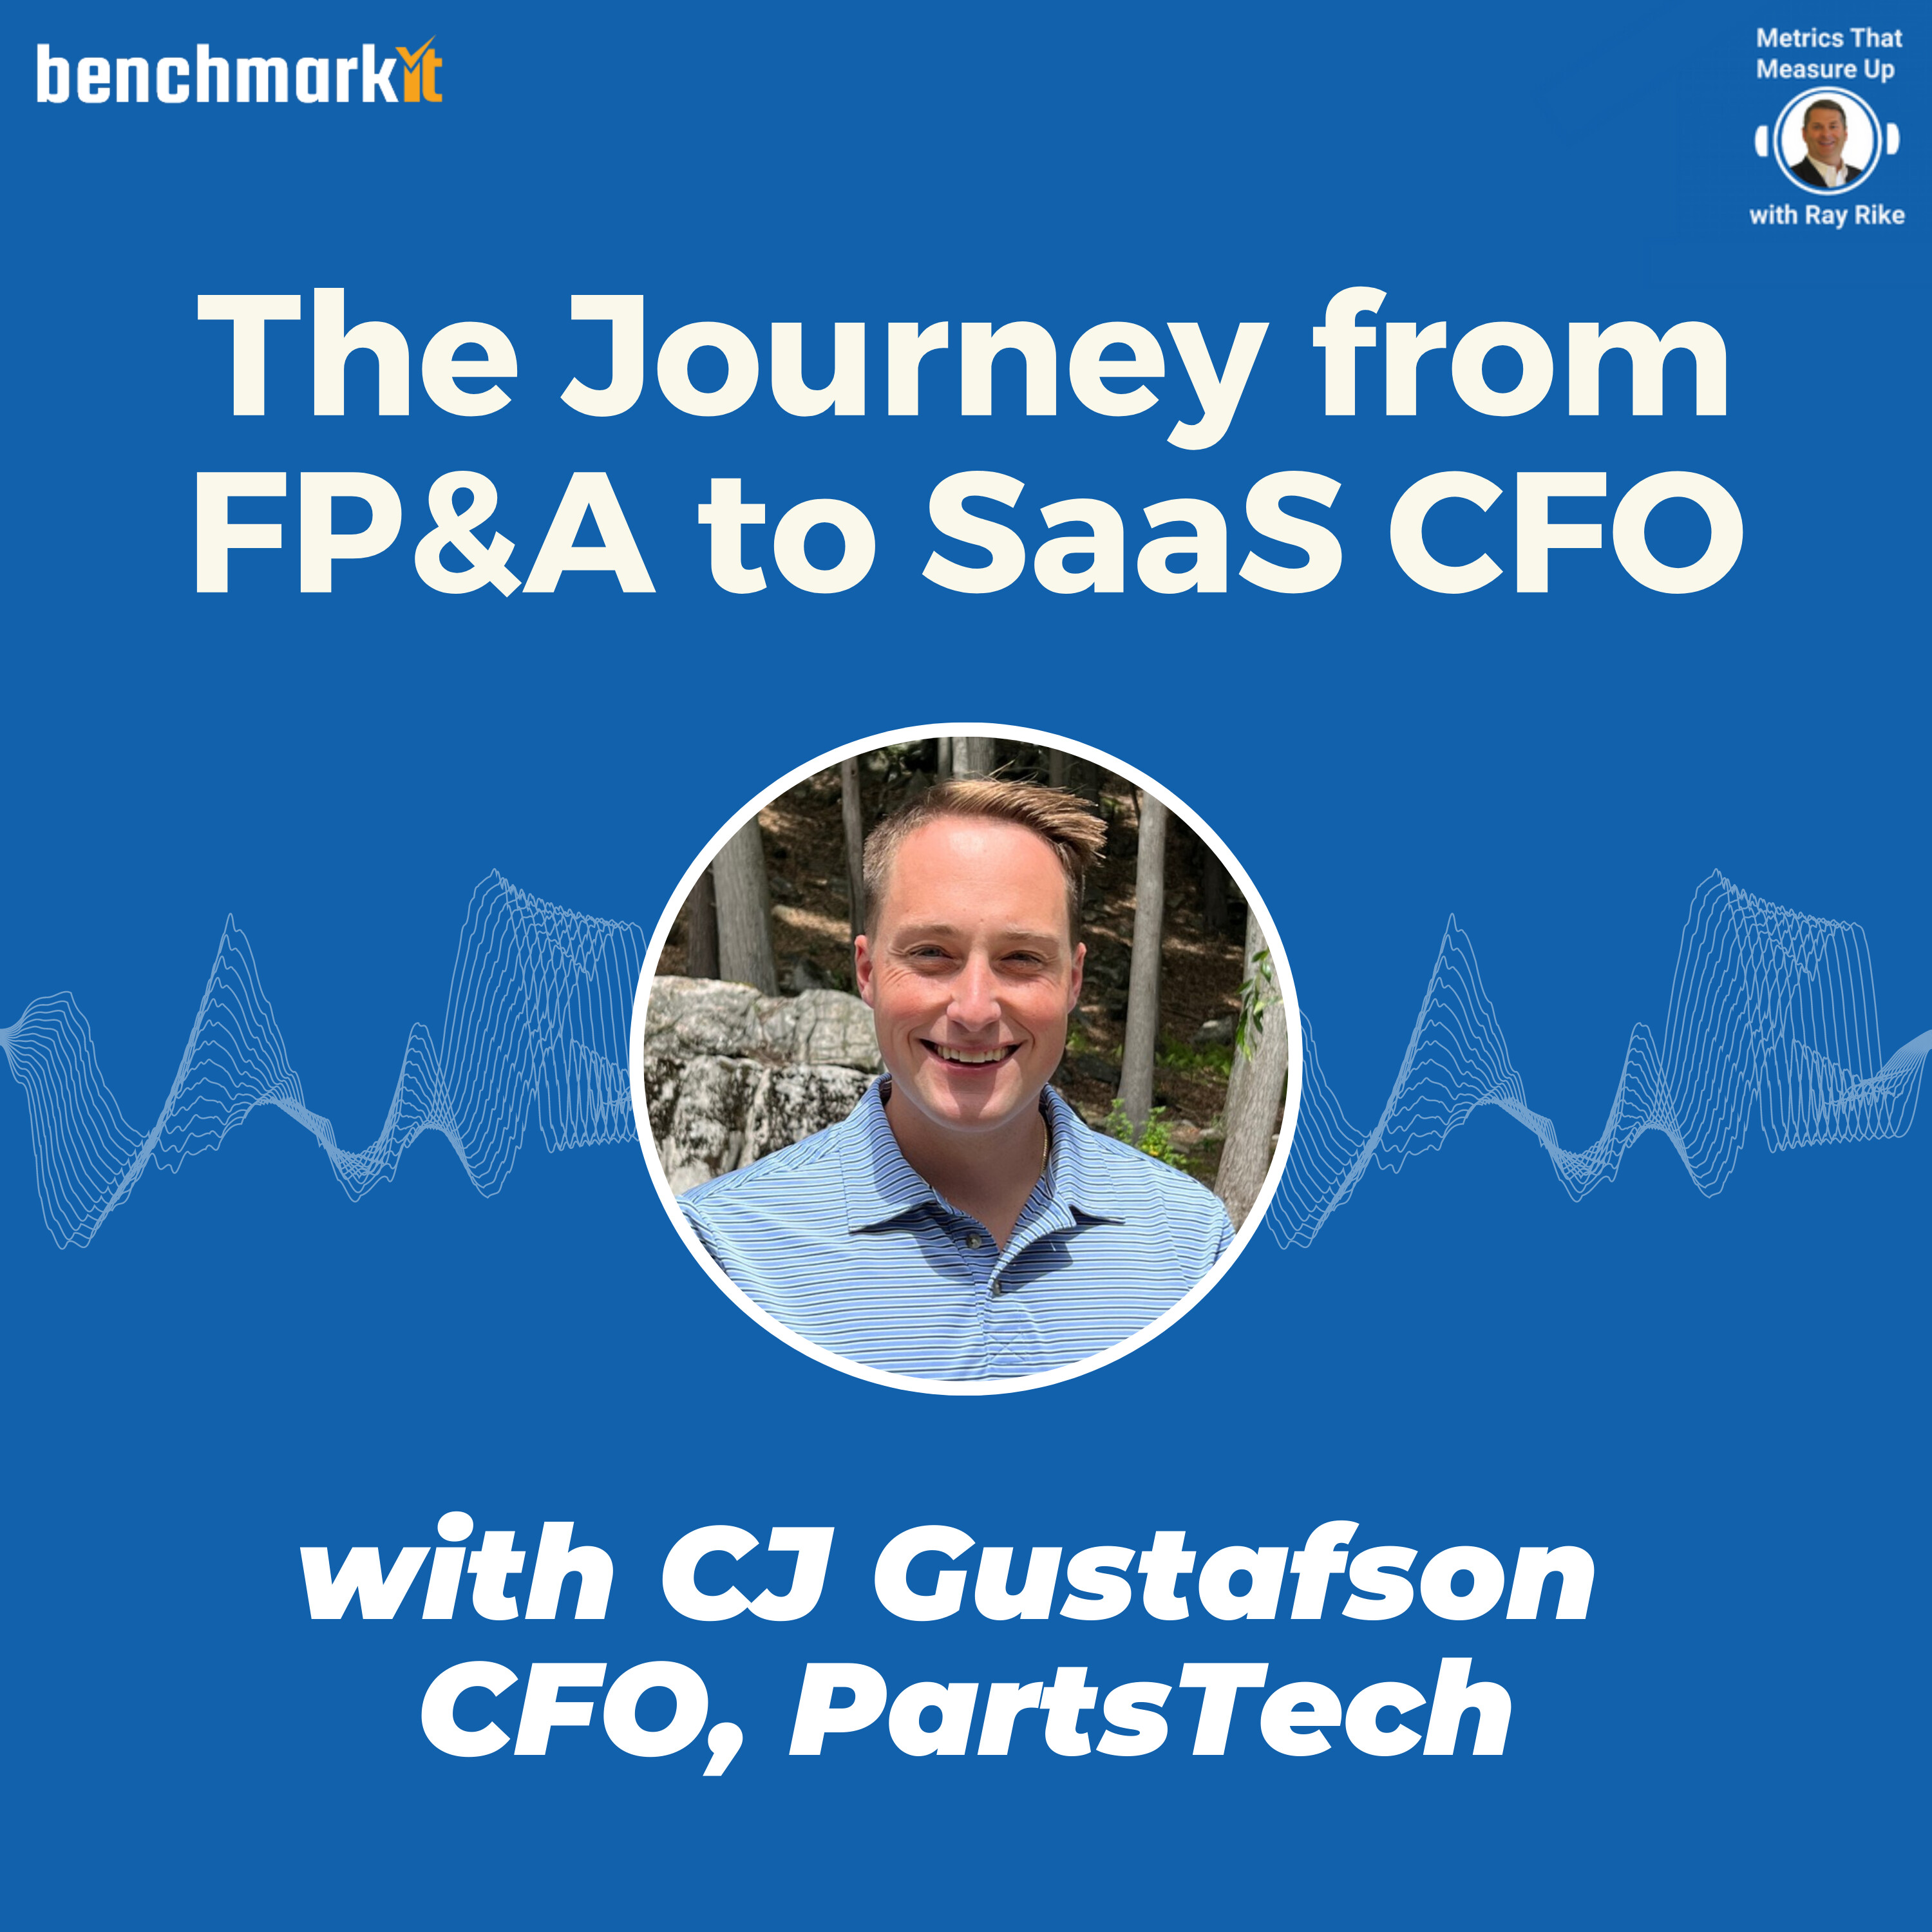 The journey from FP&A to SaaS CFO - with CJ Gustafson, CFO PartsTech